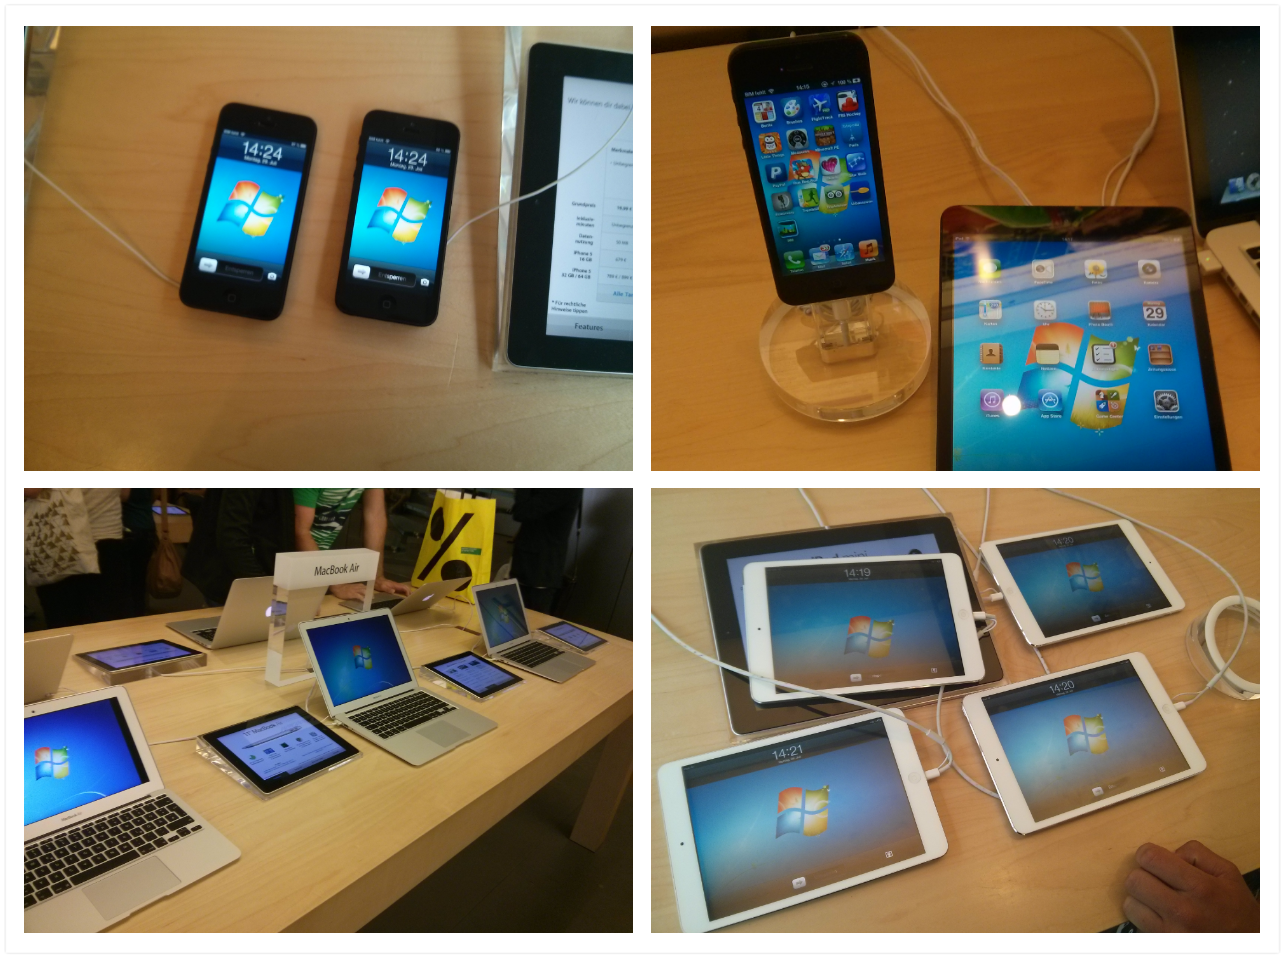 trolling apple store with my friends